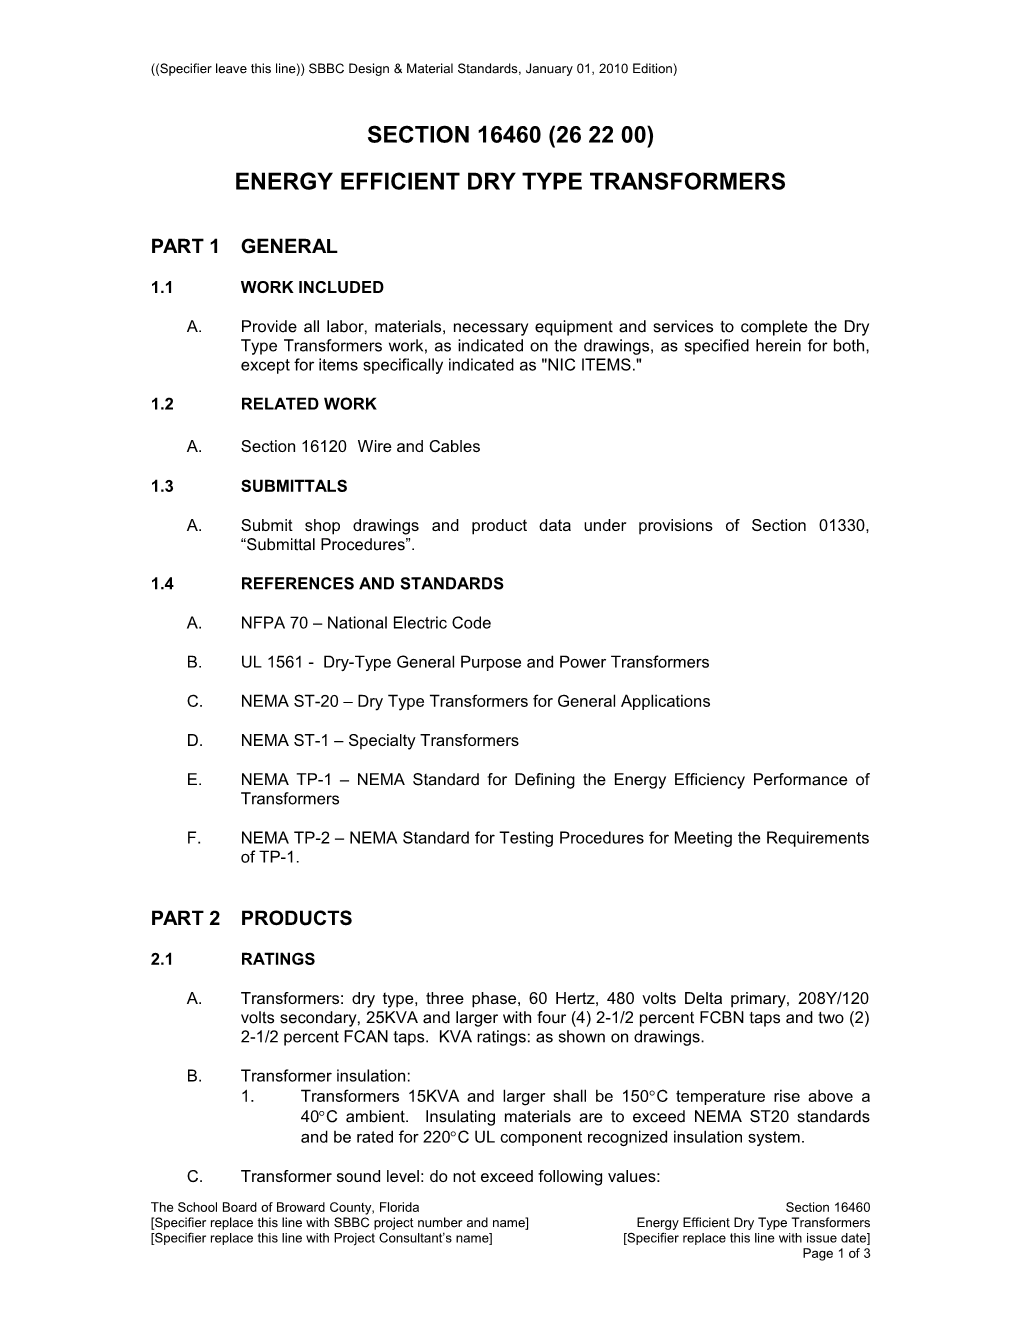 Energy Efficient Dry Type Transformers